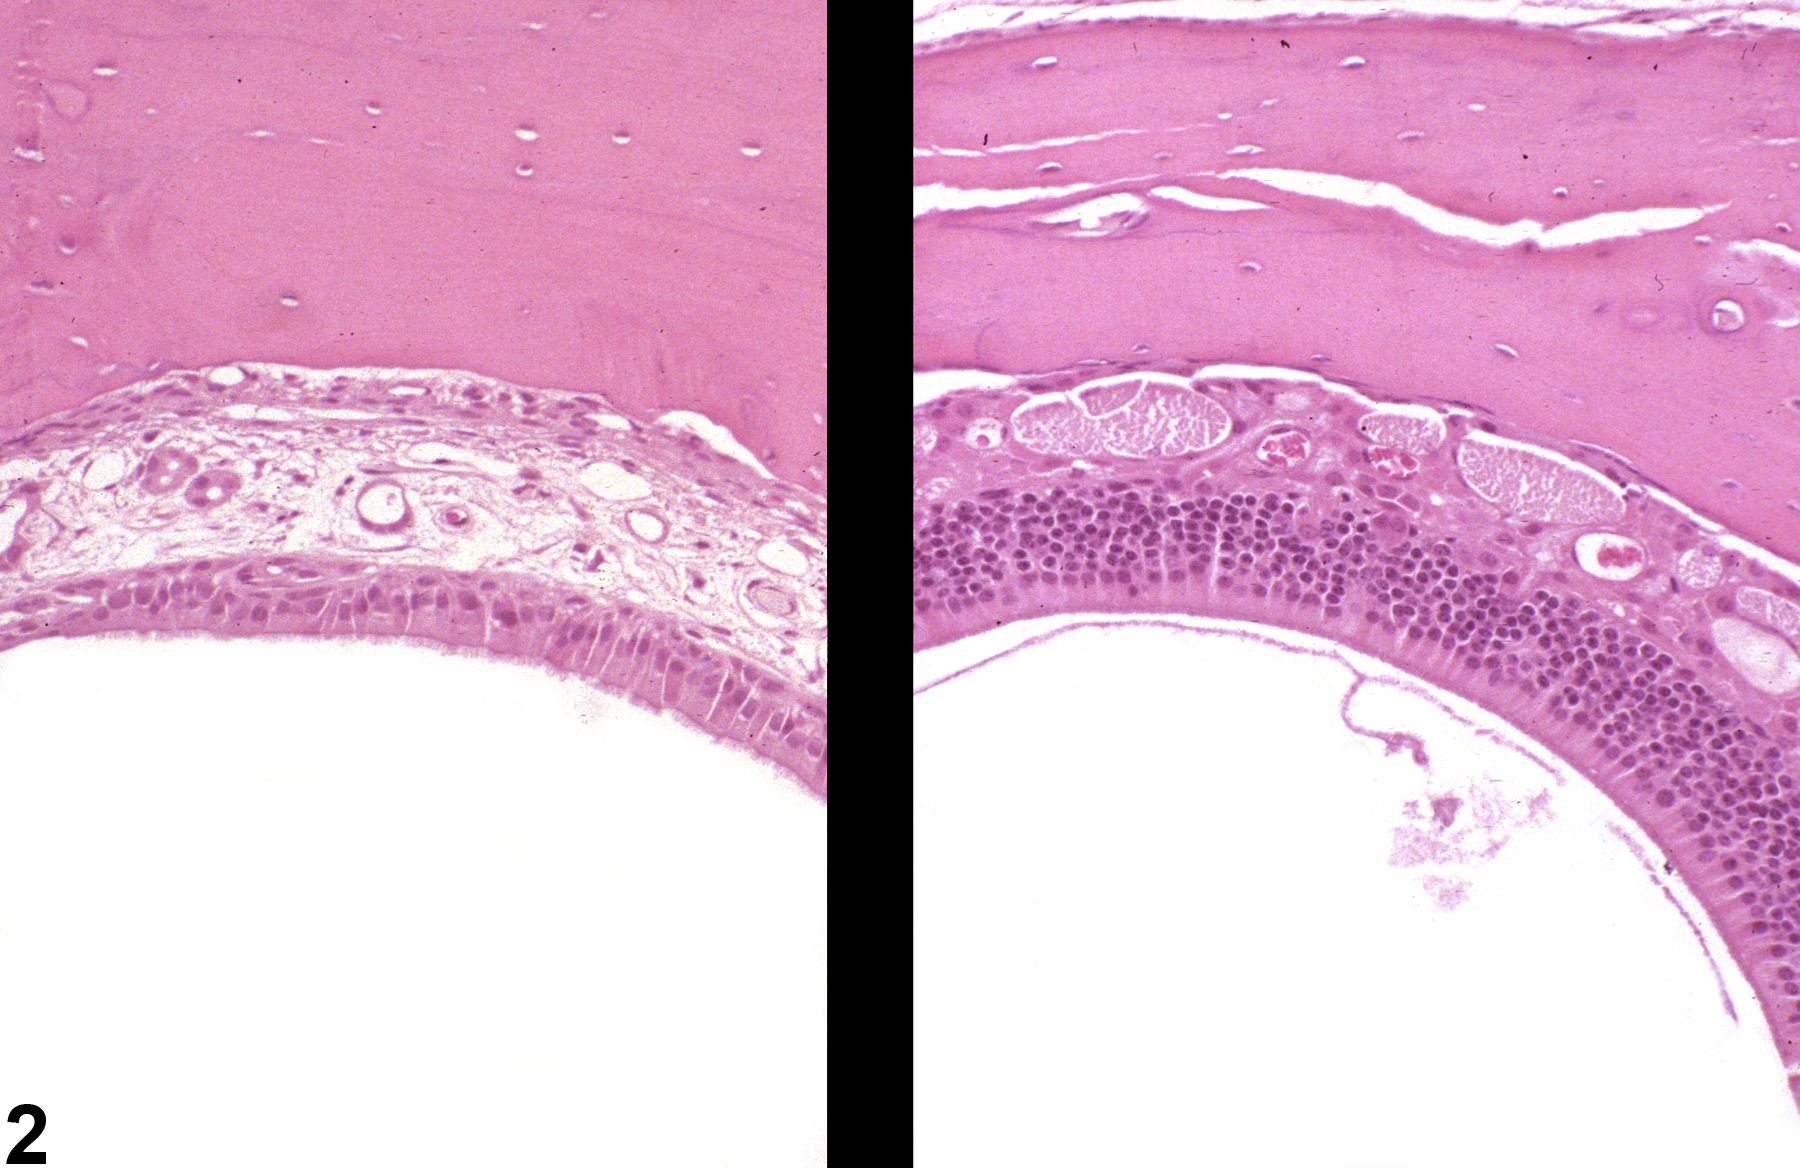 Image of metaplasia, respiratory in the nose, olfactory epithelium from a male B6C3F1/N mouse in a subchronic study